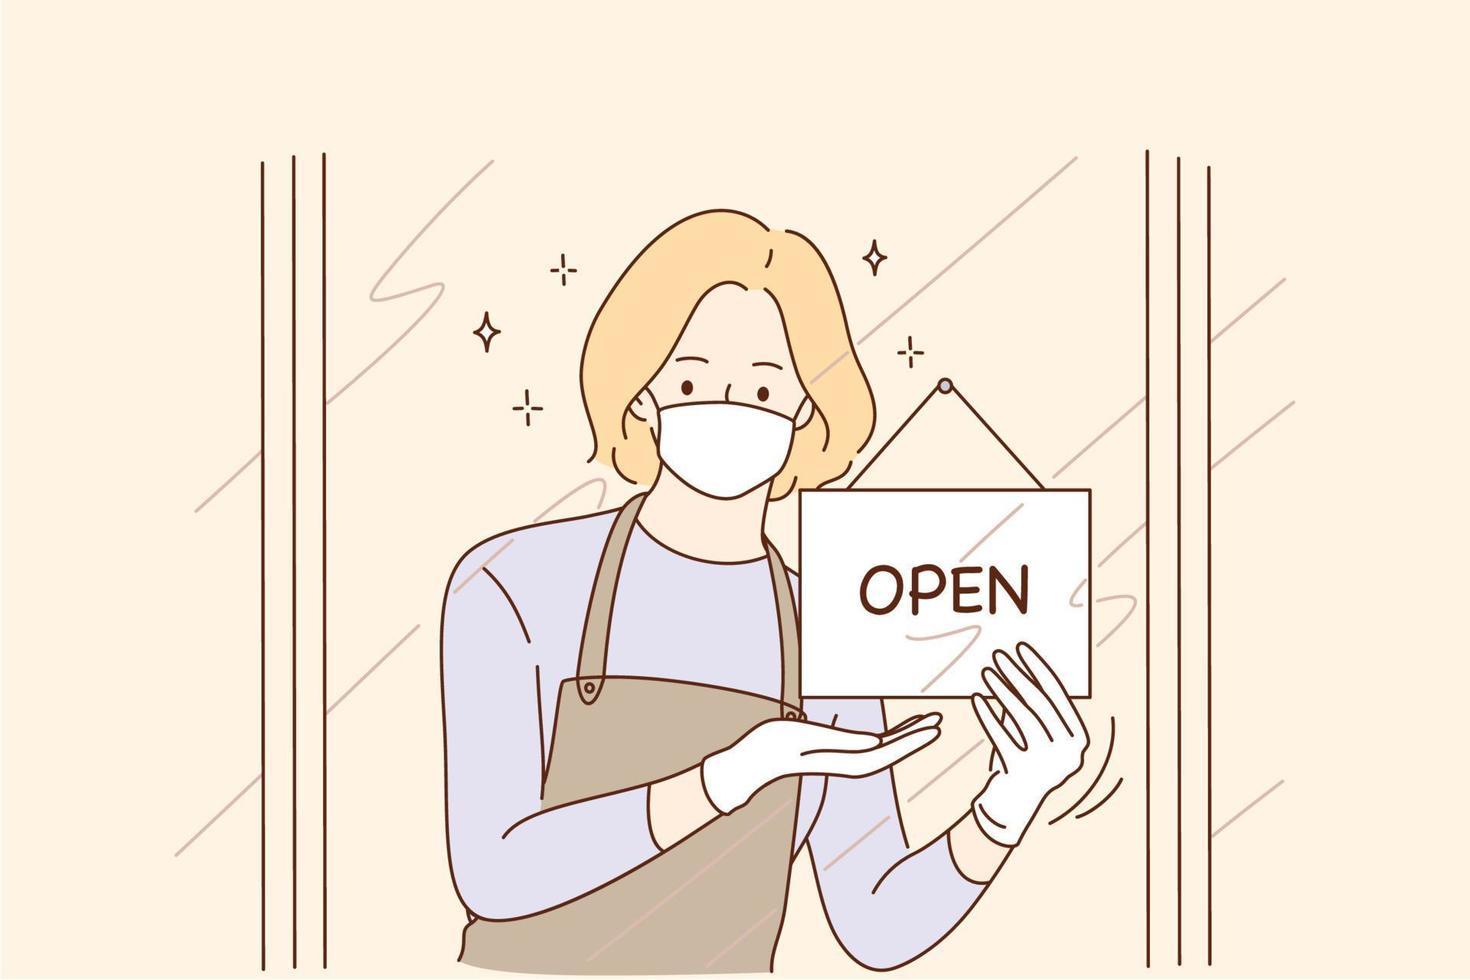 Opening doors after coronavirus pandemic, reopening concept. Young woman in protective medical mask opening door of cafe or shop with men sign and waiting for guests again vector illustration